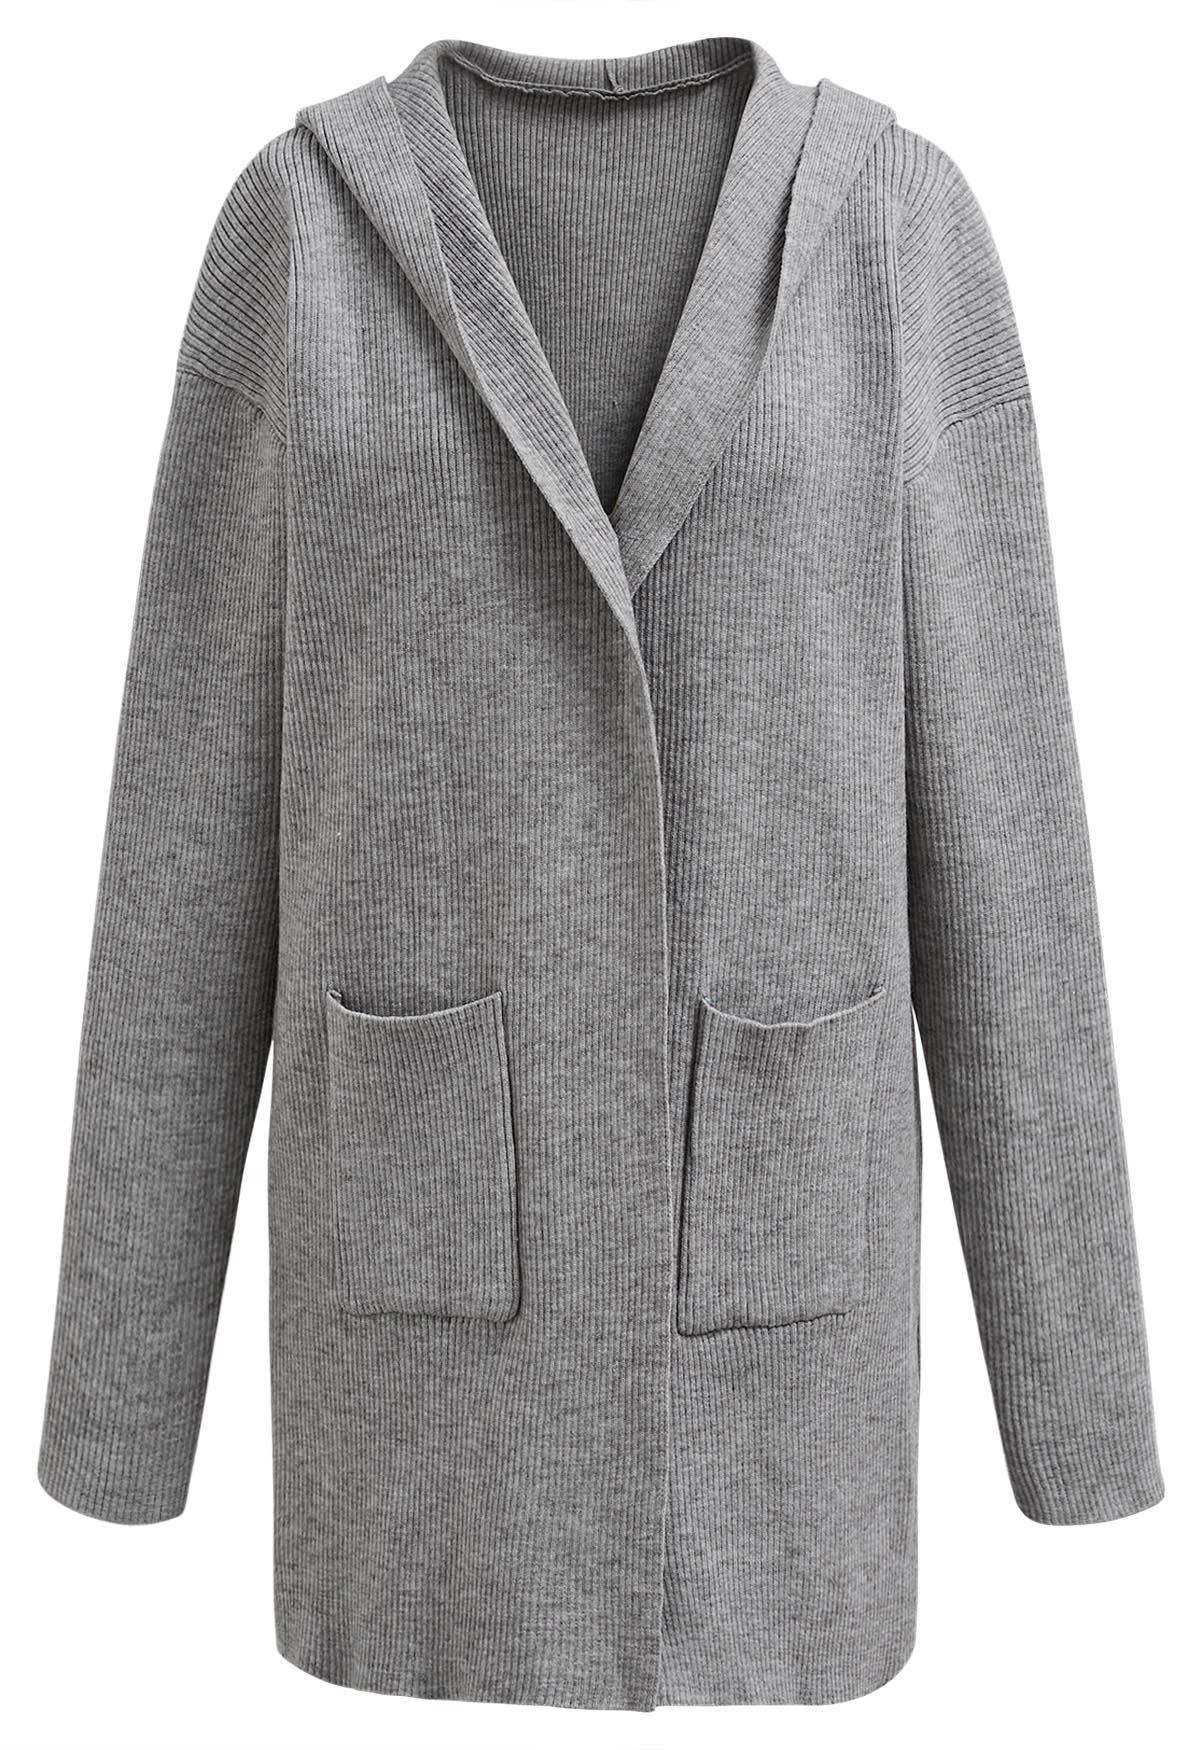 Patch Pockets Open Front Hooded Cardigan in Grey